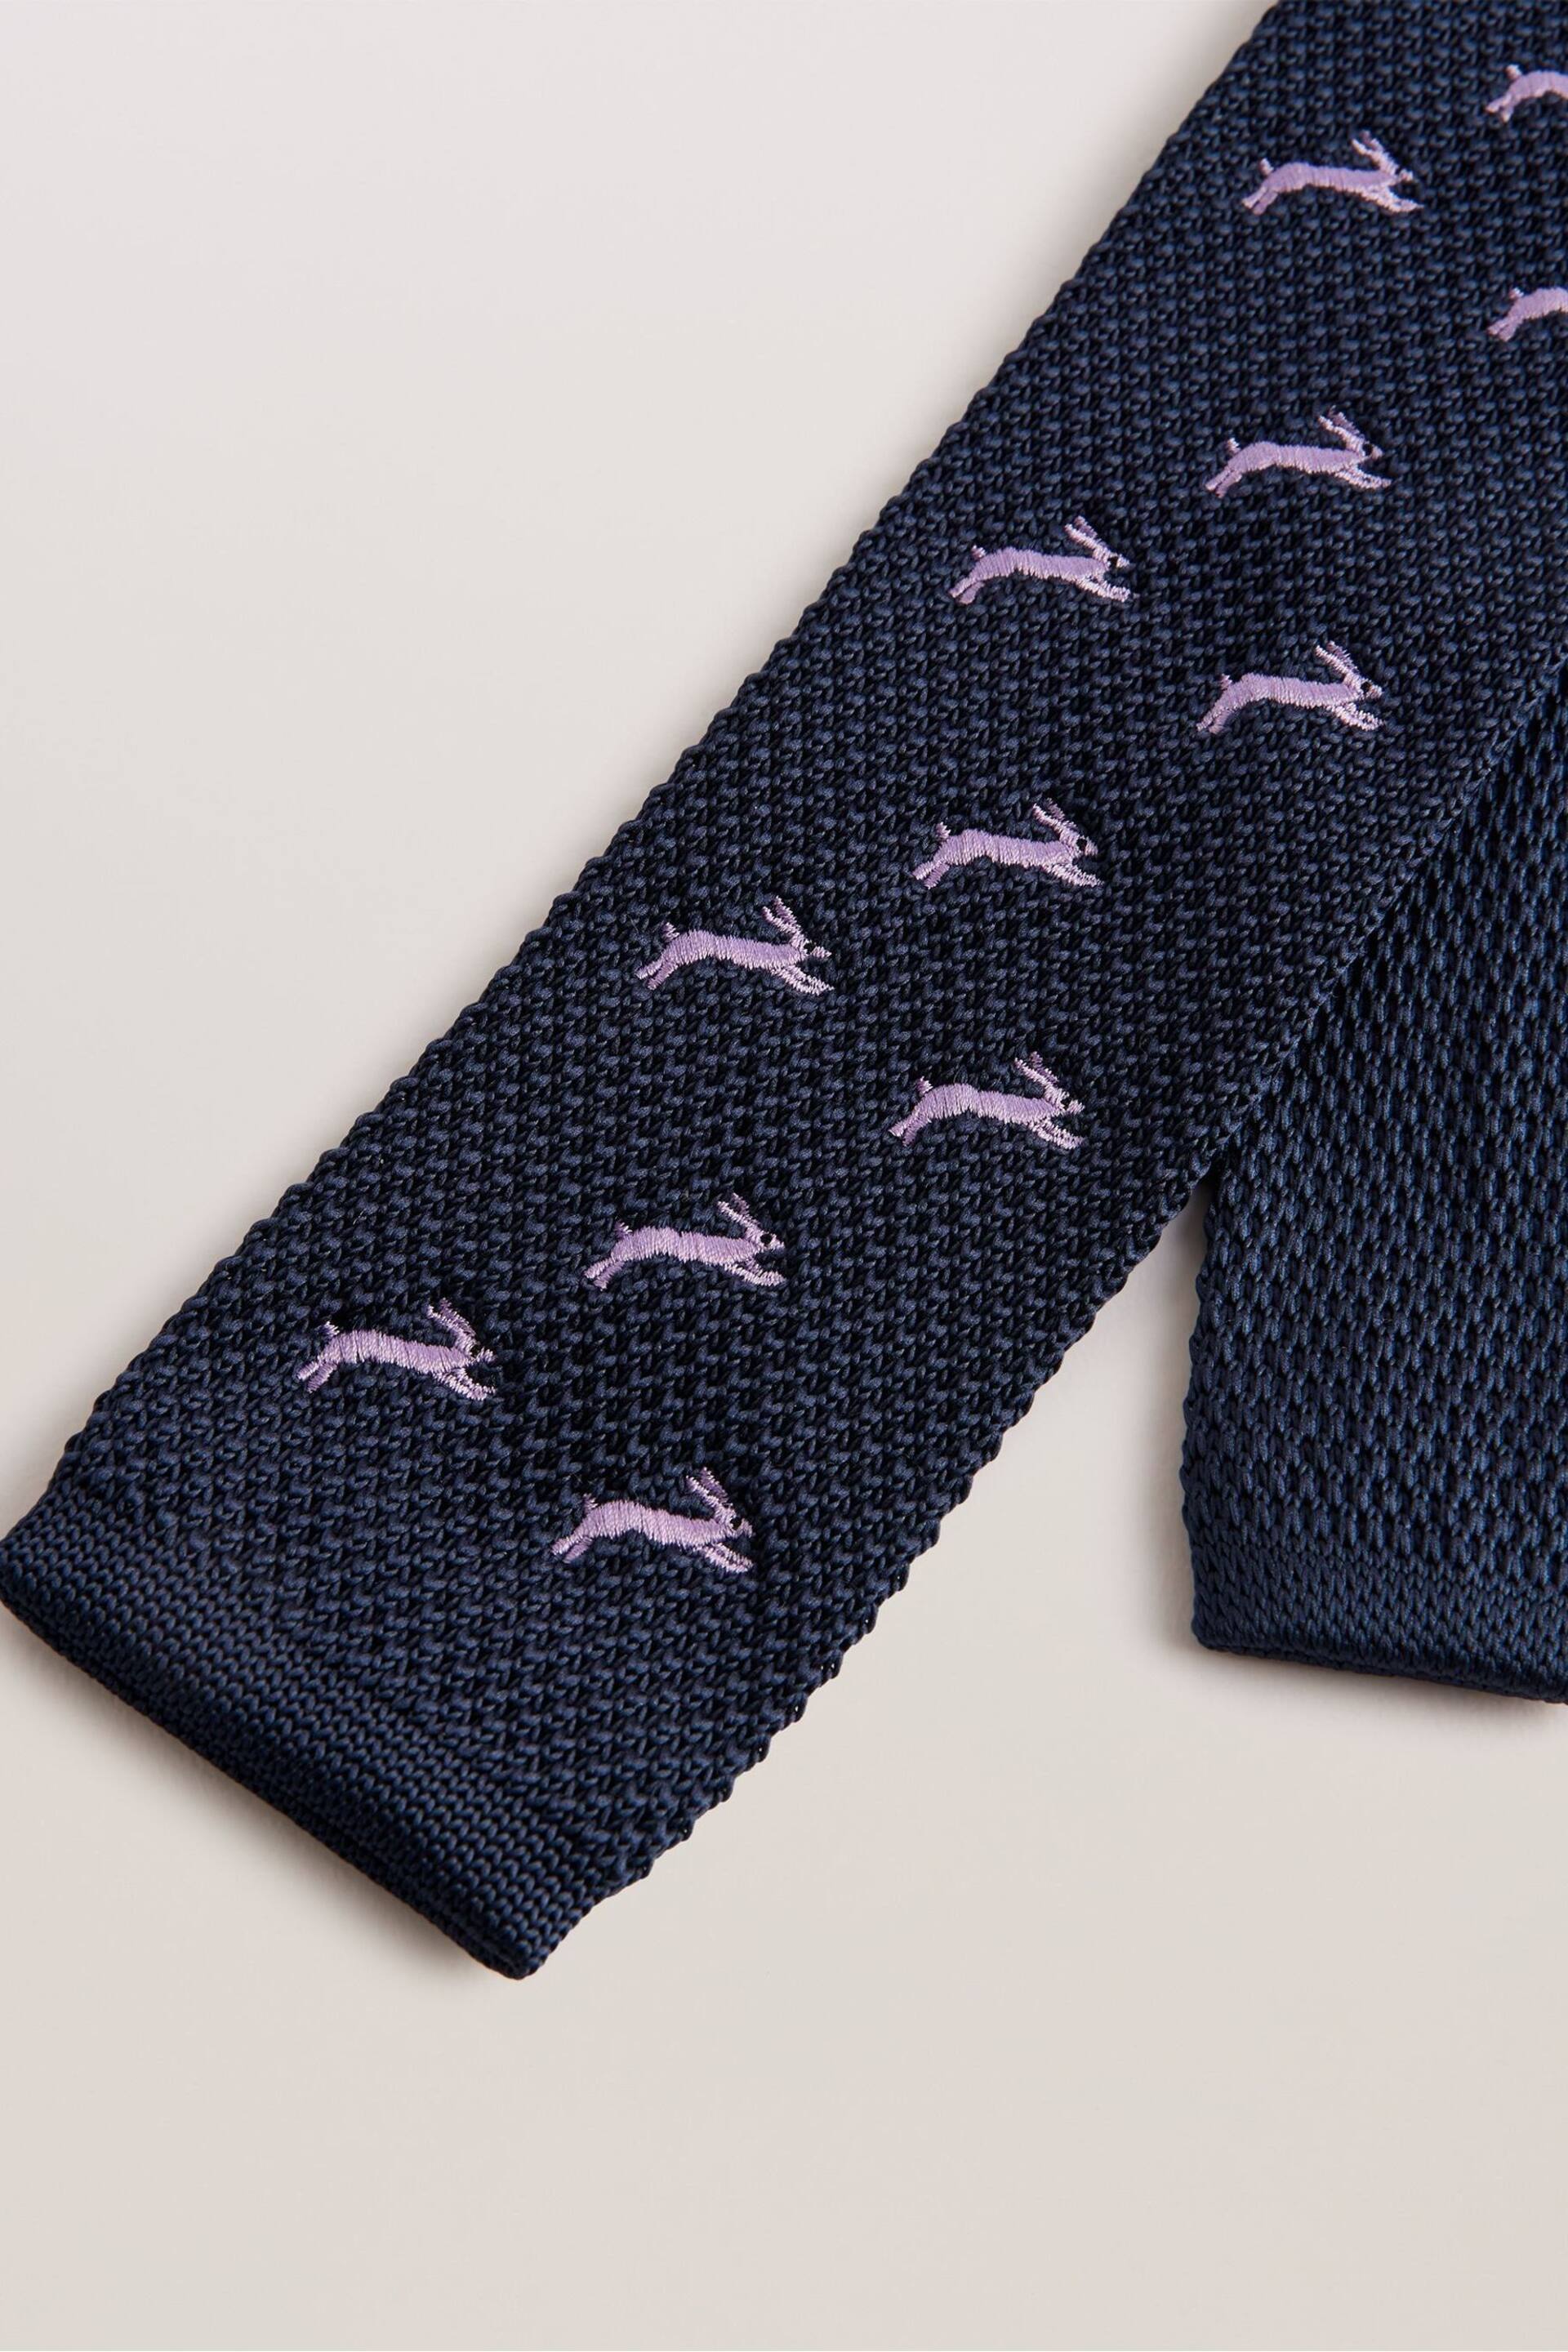 Ted Baker Blue Sanfred Embroidered Knit Tie - Image 2 of 4